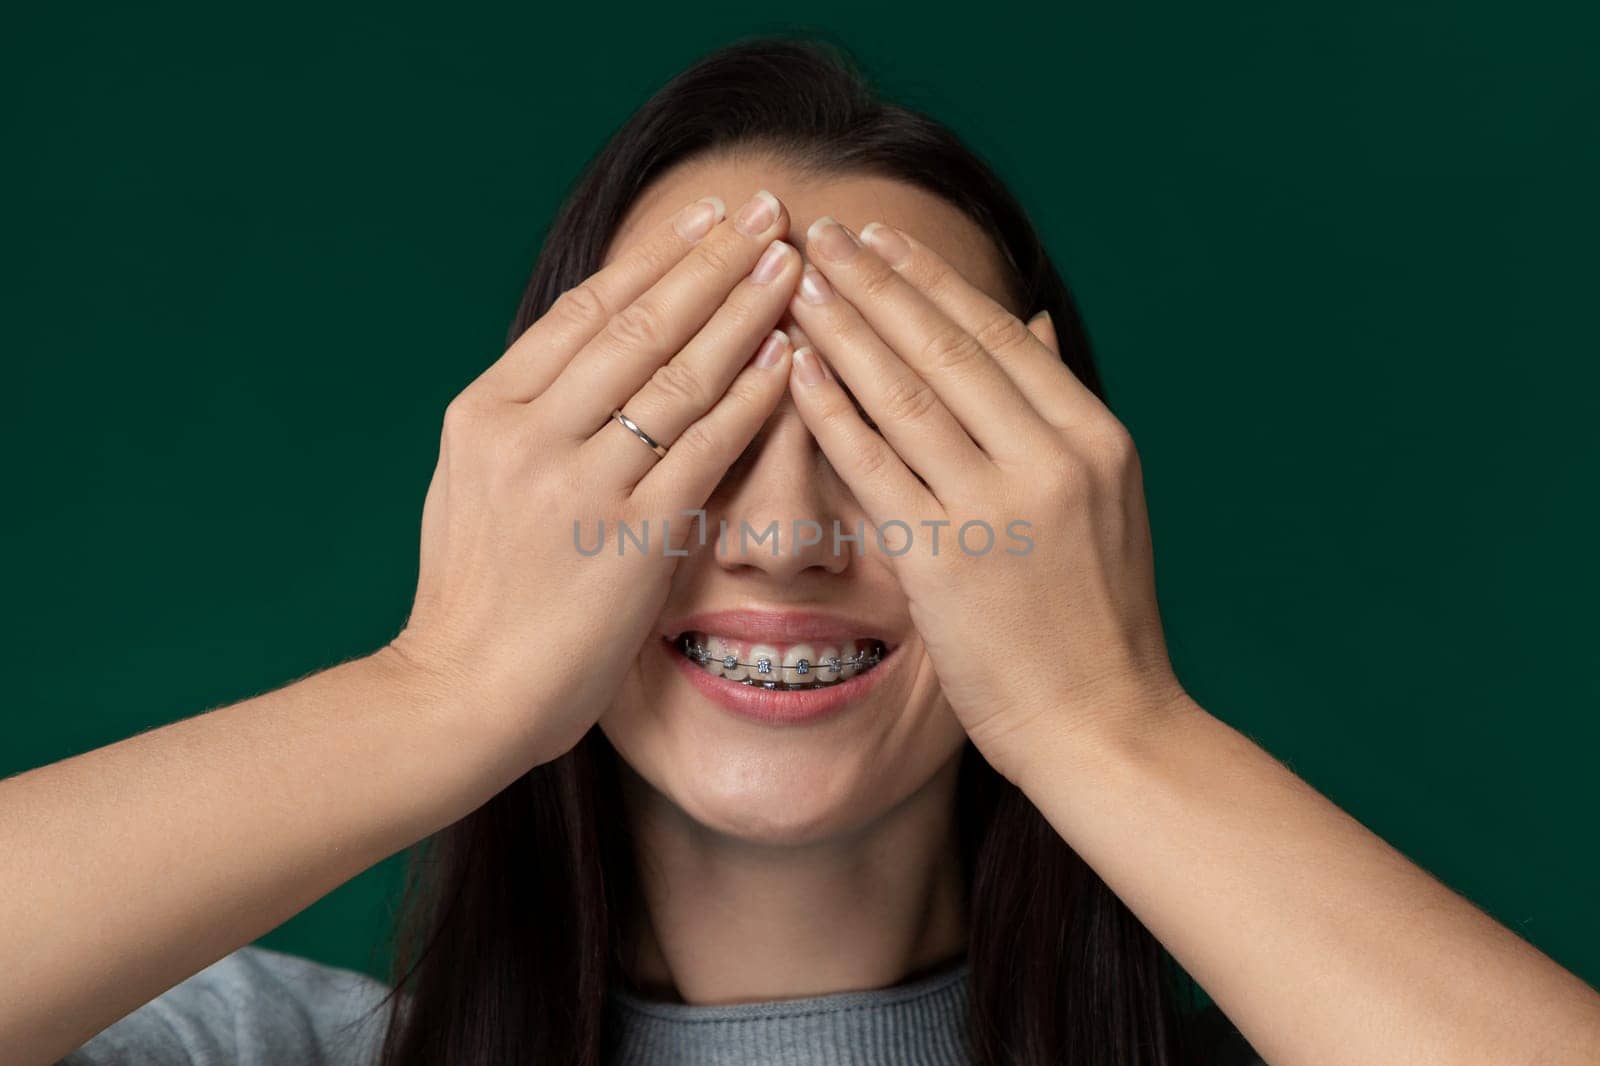 A woman is shown covering her eyes with her hands, possibly indicating surprise, fear, or to shield herself from a bright light. Her hands are positioned over her eyes in a protective gesture.